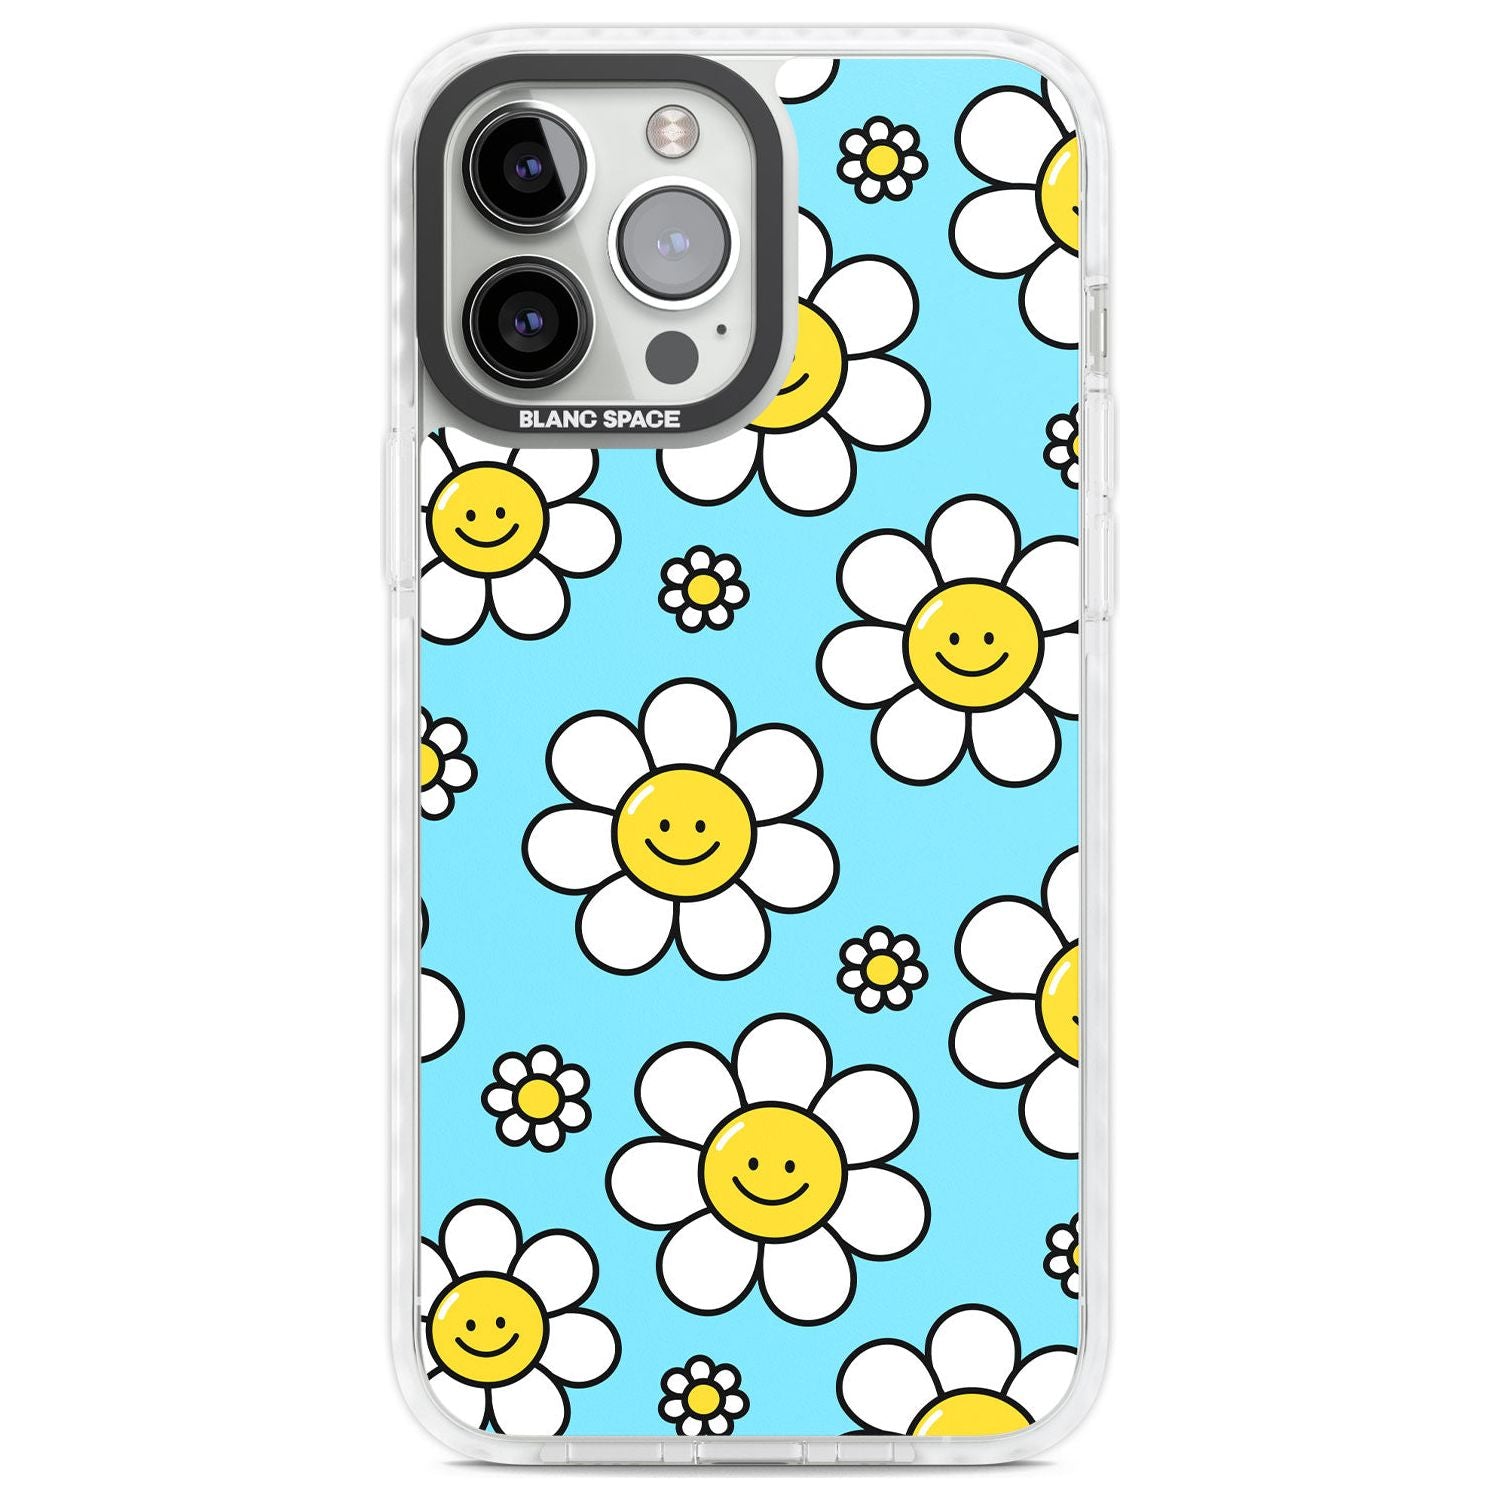 Daisy Faces Kawaii Pattern Phone Case iPhone 13 Pro Max / Impact Case,iPhone 14 Pro Max / Impact Case Blanc Space